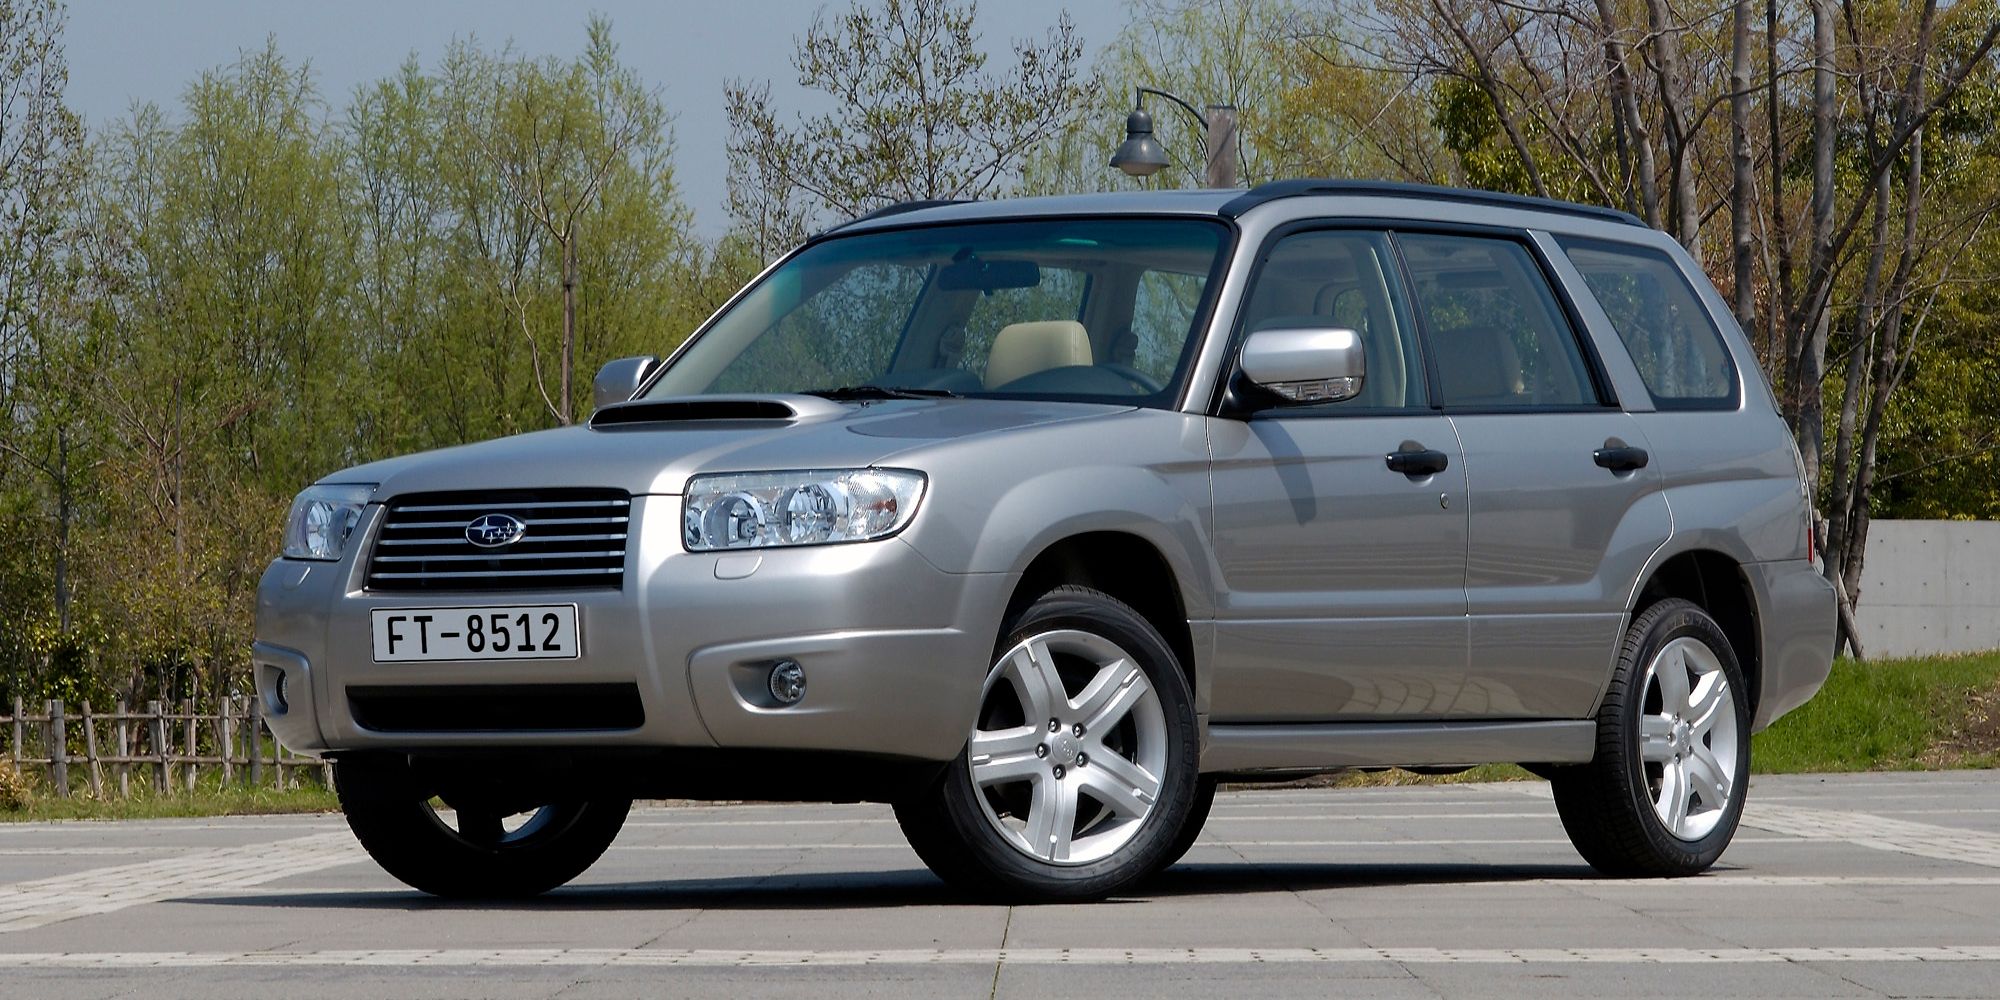 Front 3/4 view of the Forester 2.5XT